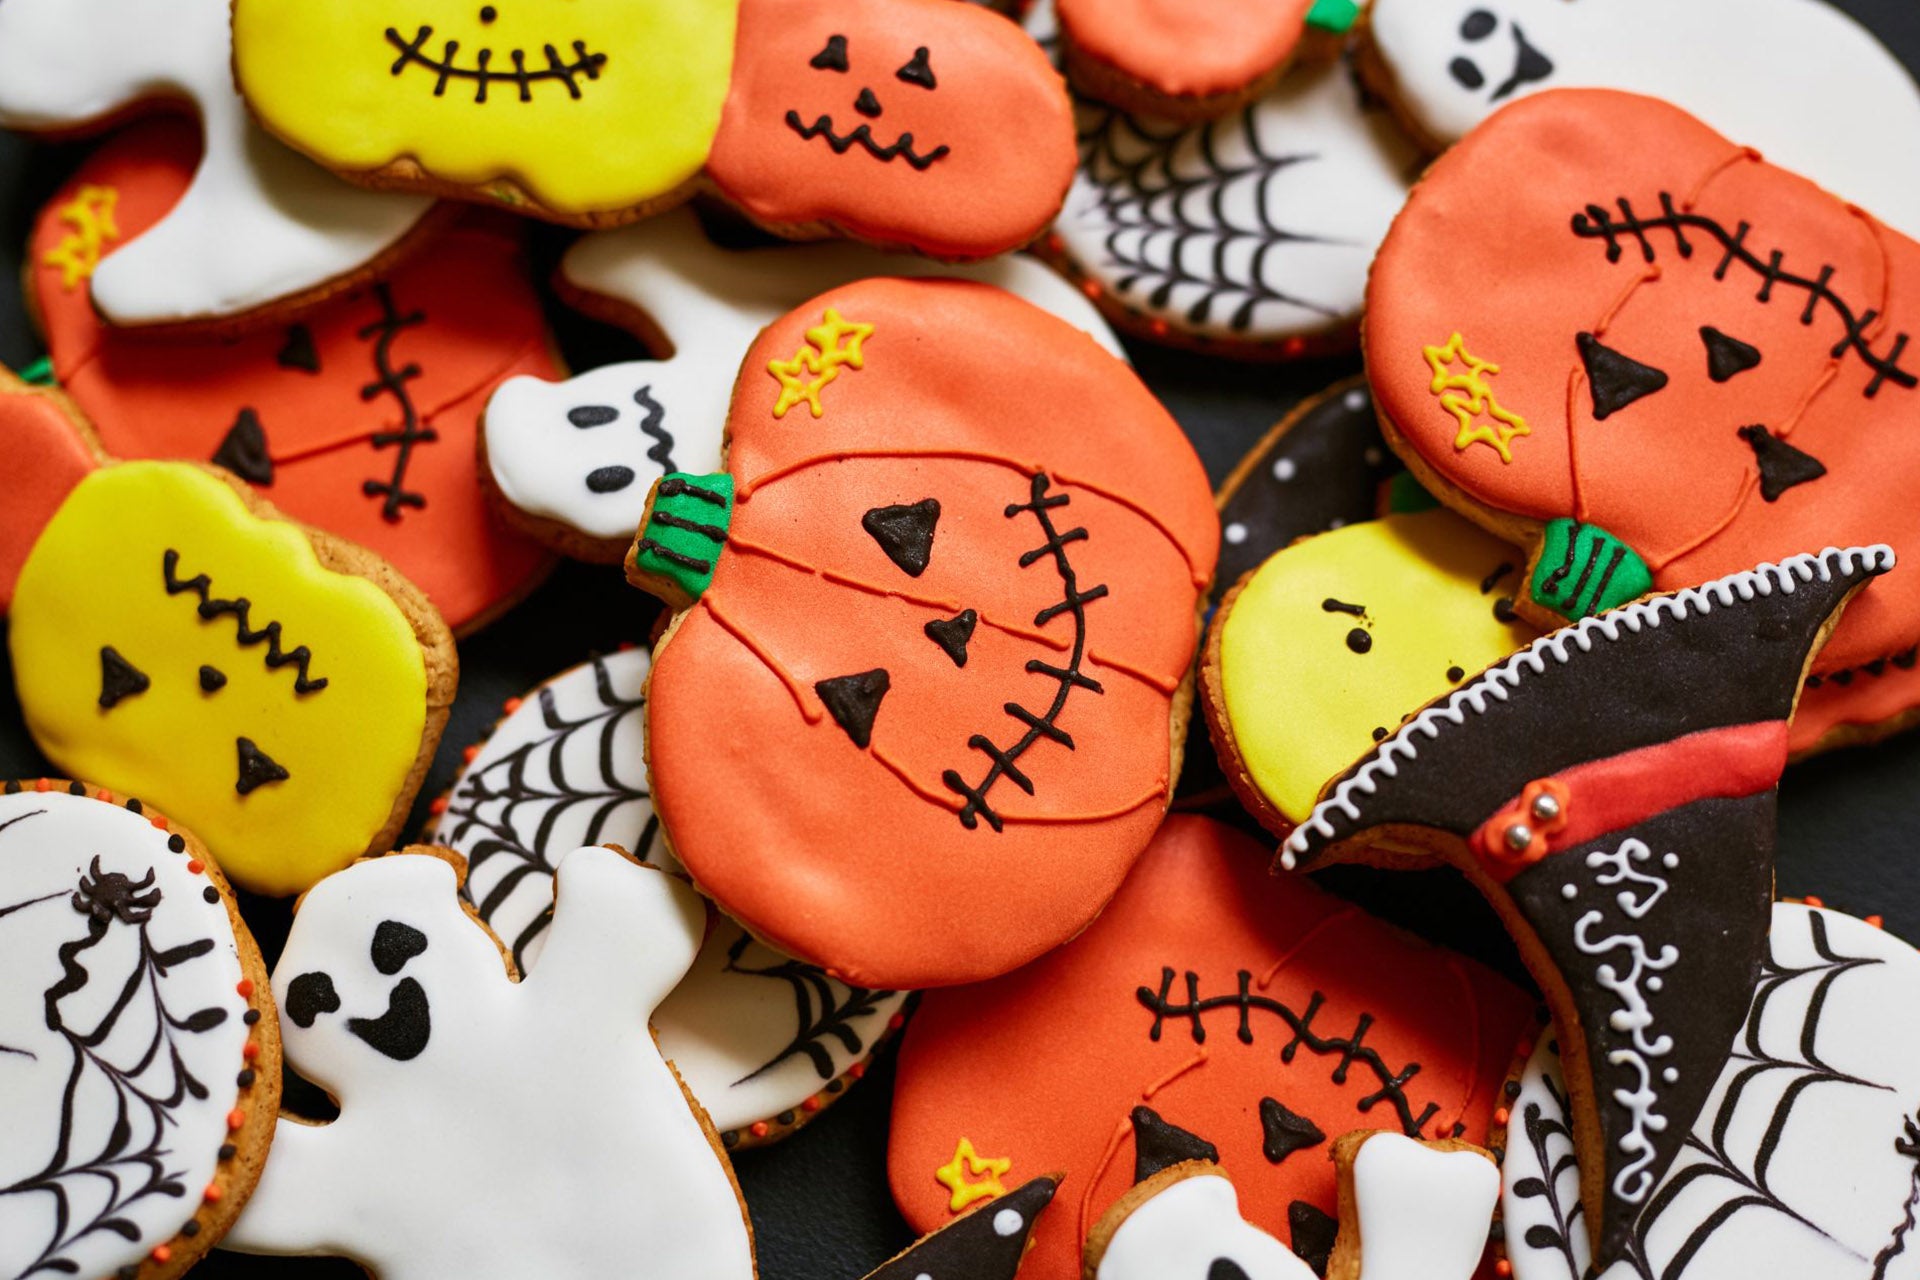 An assortment of Halloween sugar cookies in the form of pumpkins, spiderwebs, and ghosts